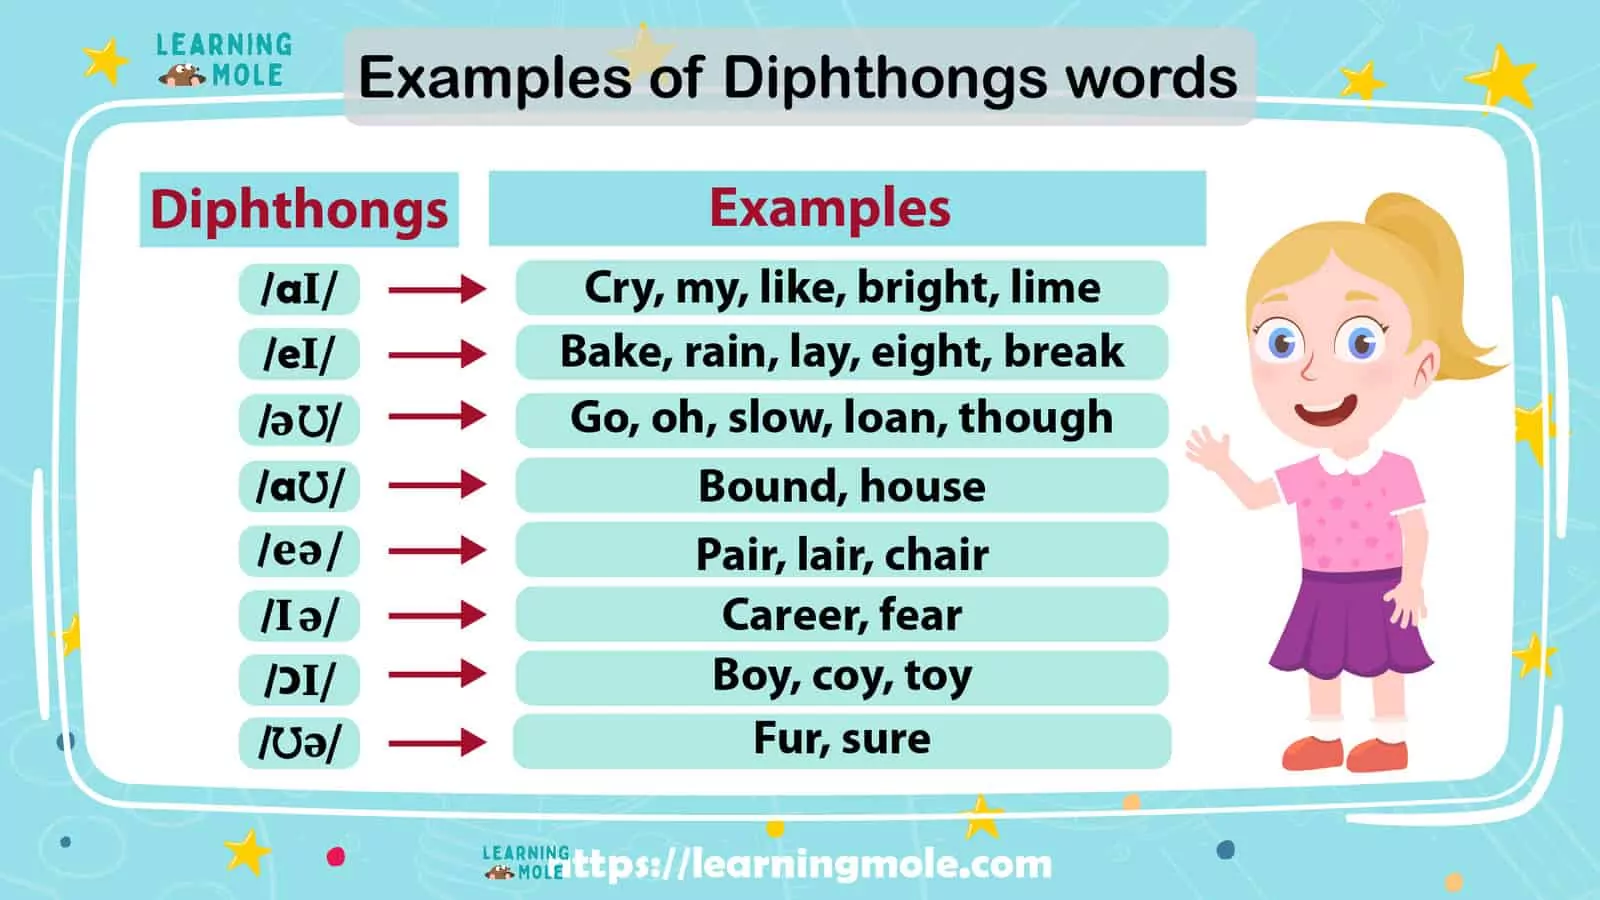 What is a Diphthong?